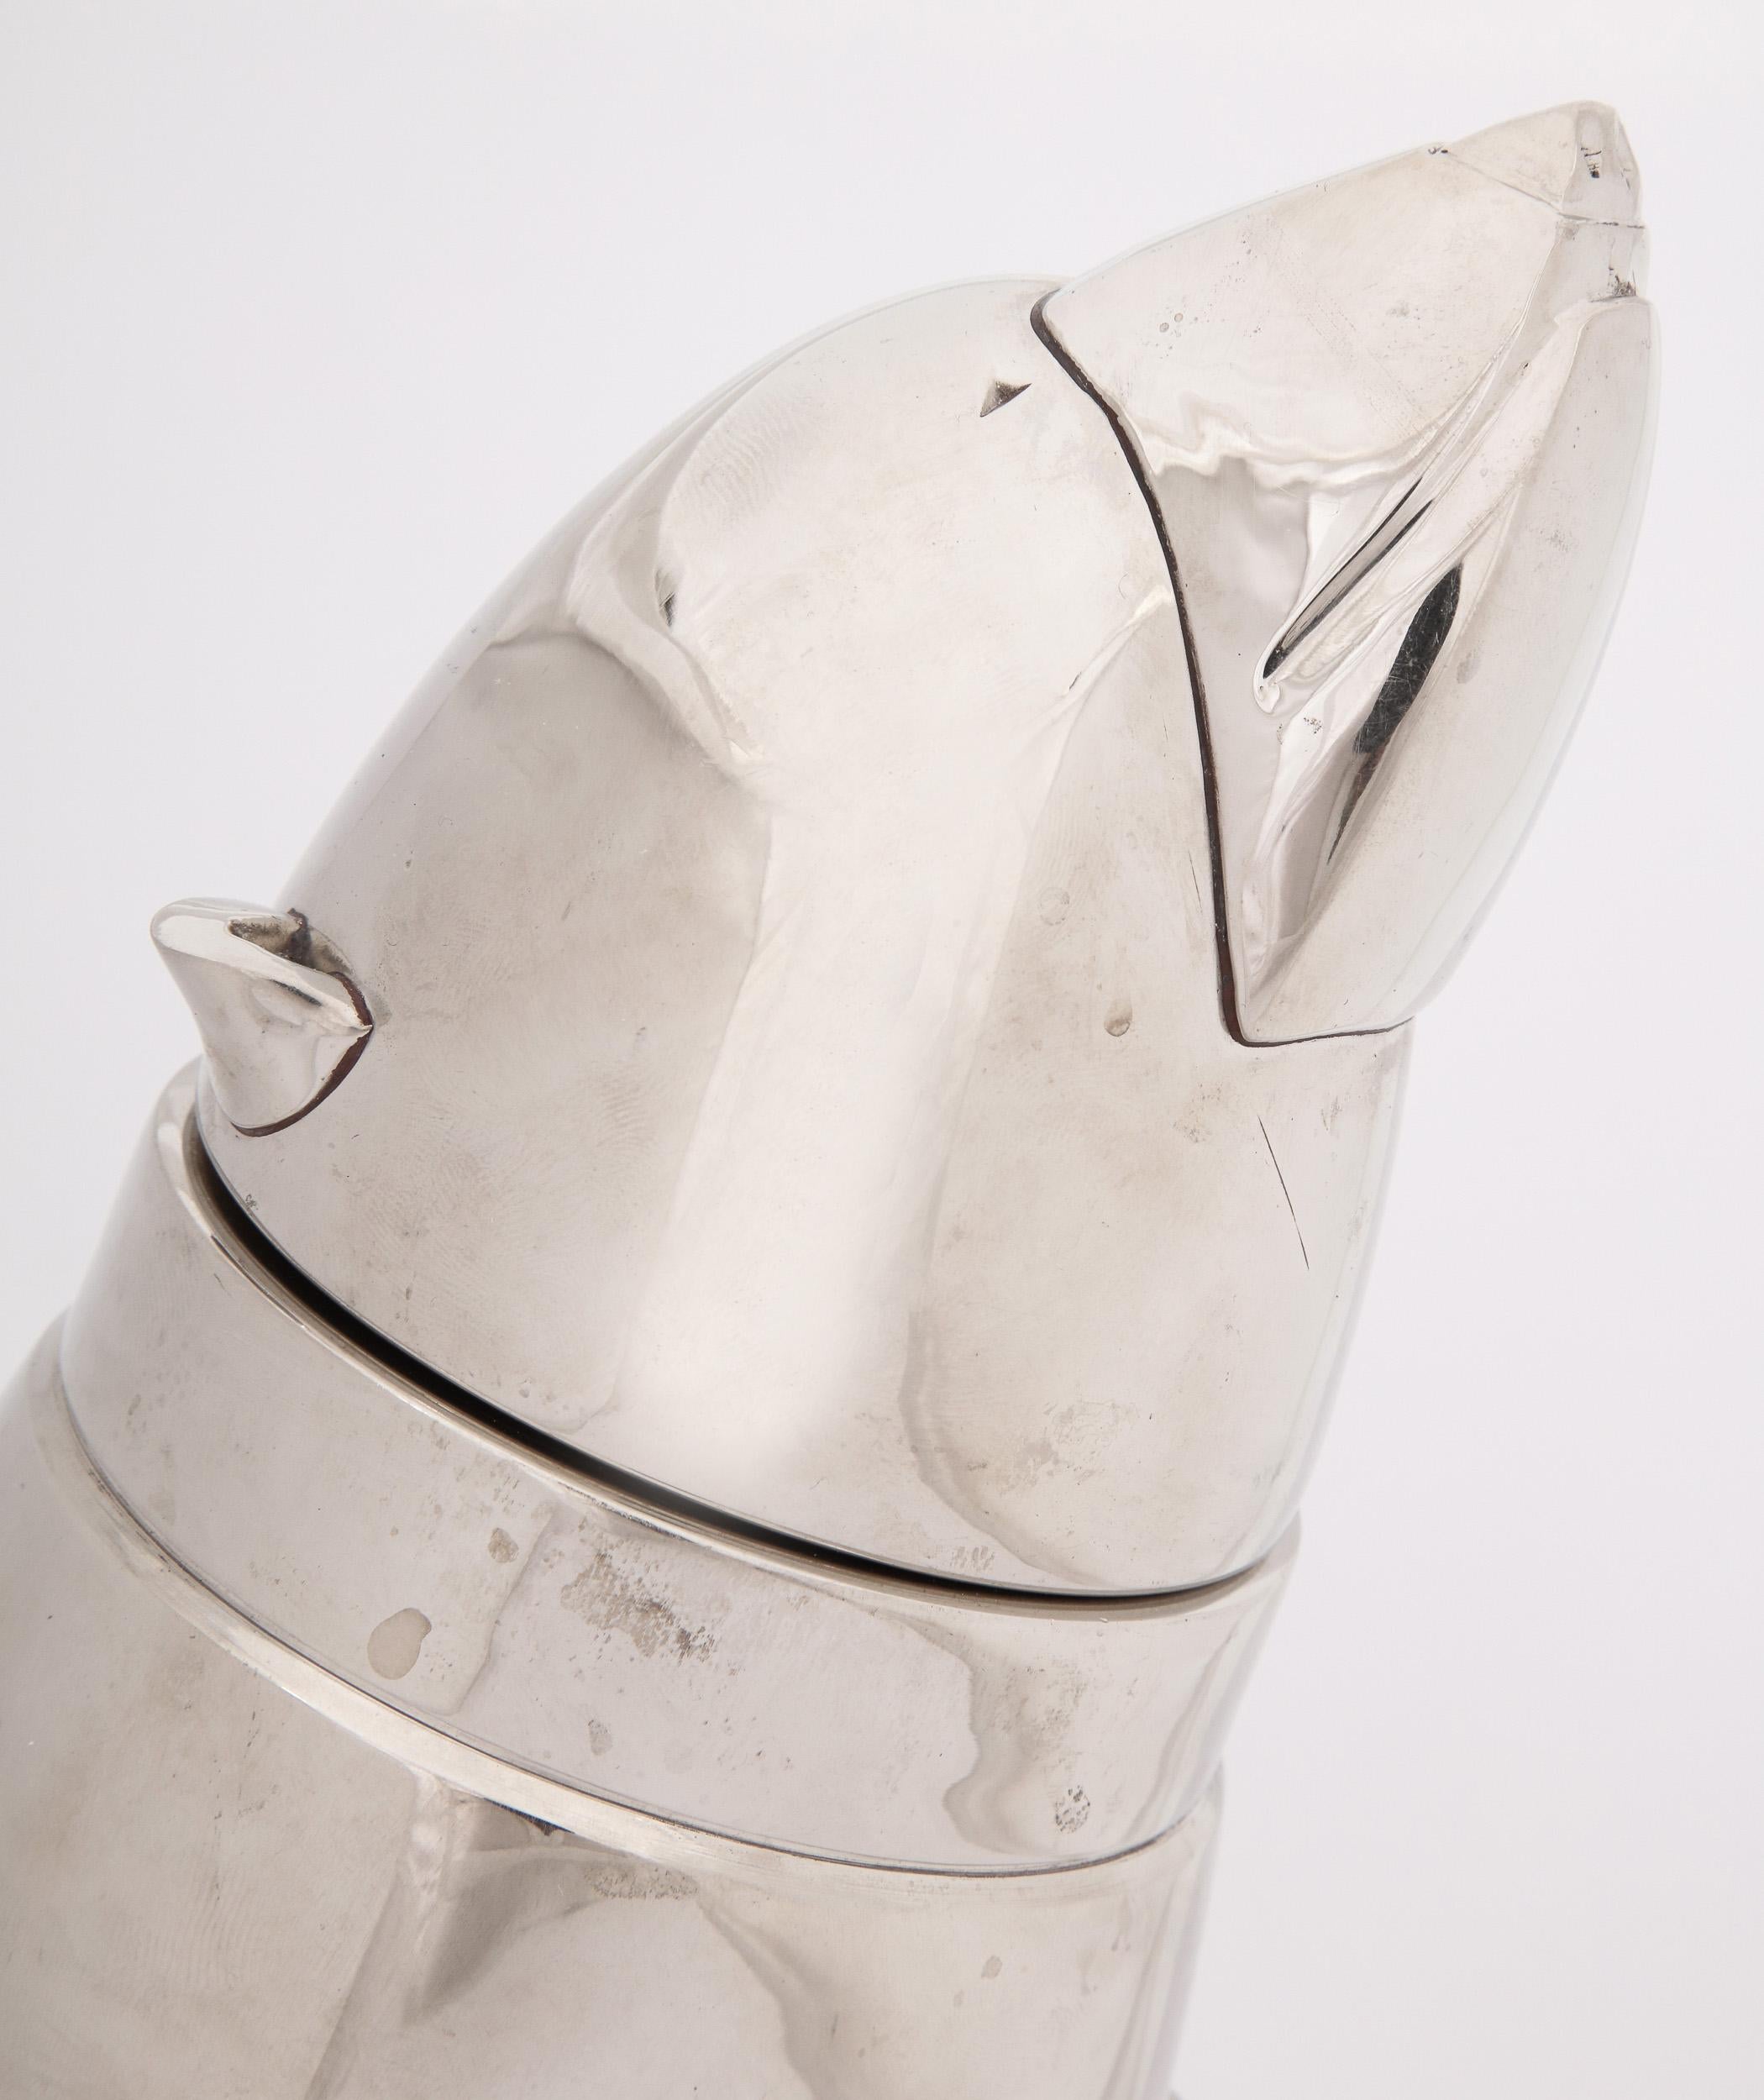 'Polar Bear' cocktail shaker,

circa 1930s.

A very heavy gauge, silver-plated cocktail shaker in the form of a polar bear, the head removing to reveal the strainer.

Good condition. Normal wear consistent with age and use. 

Measures: 10.5